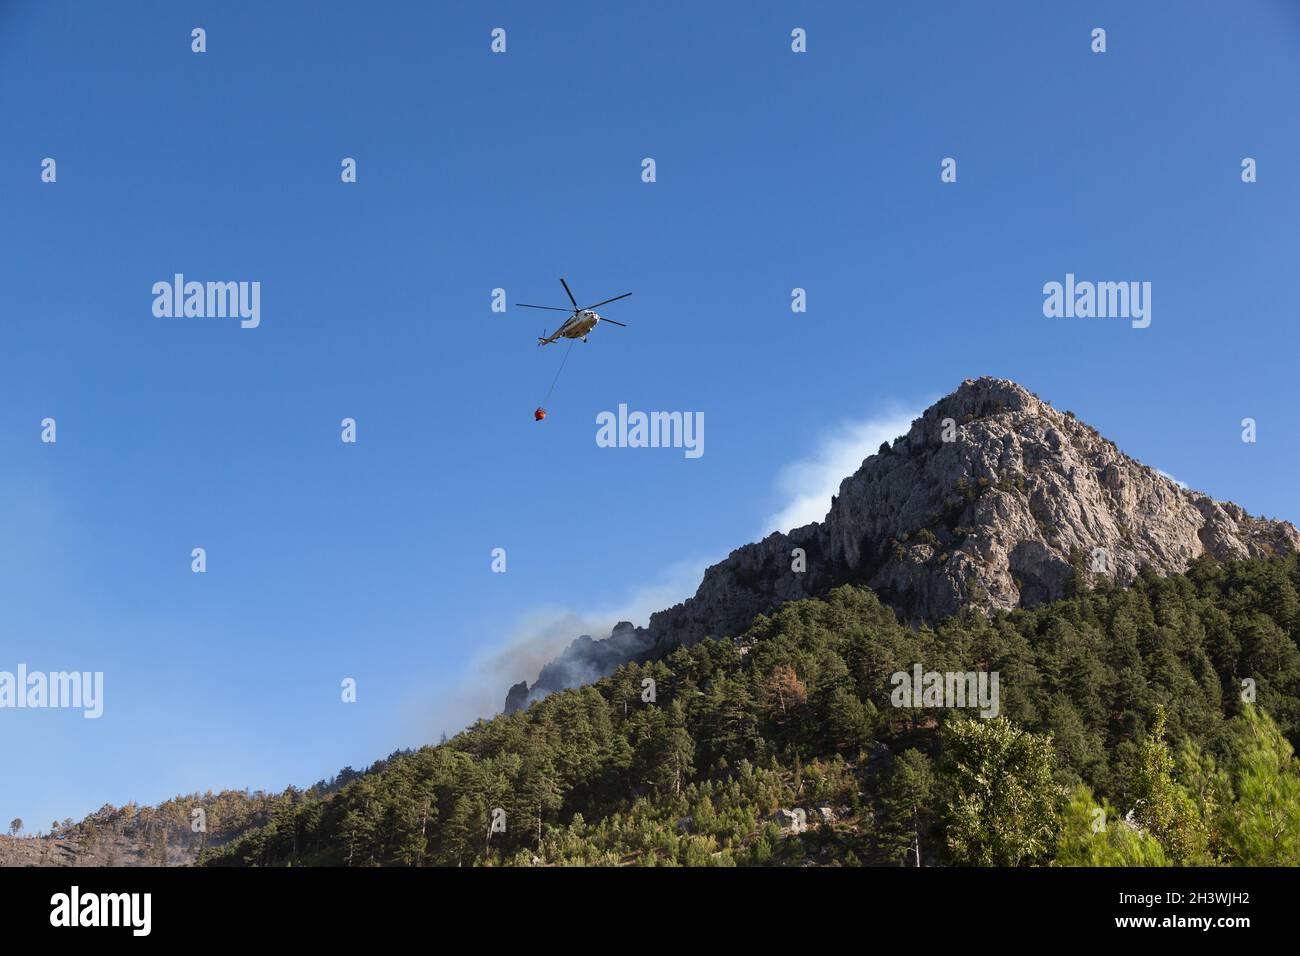 Wildfire helicopter goes to pour water on a fire on the slope of a steep, rocky hill. Stock Photo